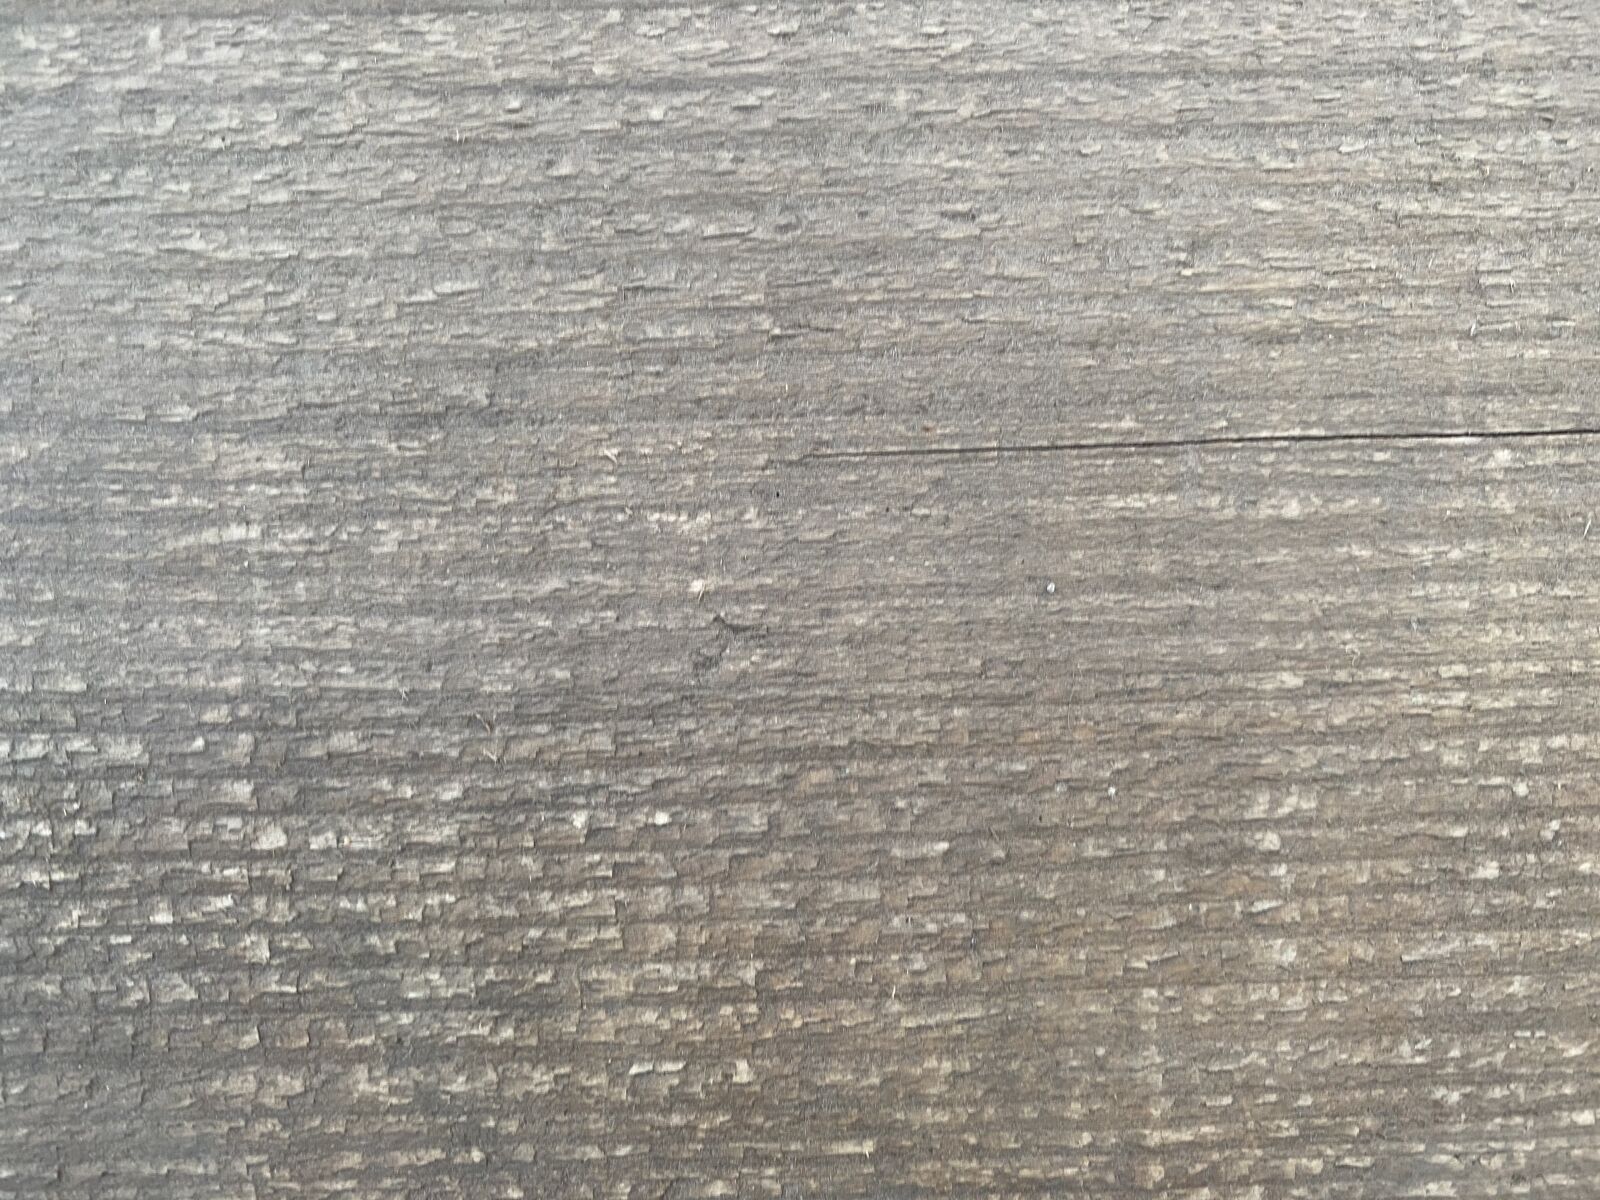 Apple iPhone 11 Pro Max sample photo. Material, wood, surface photography